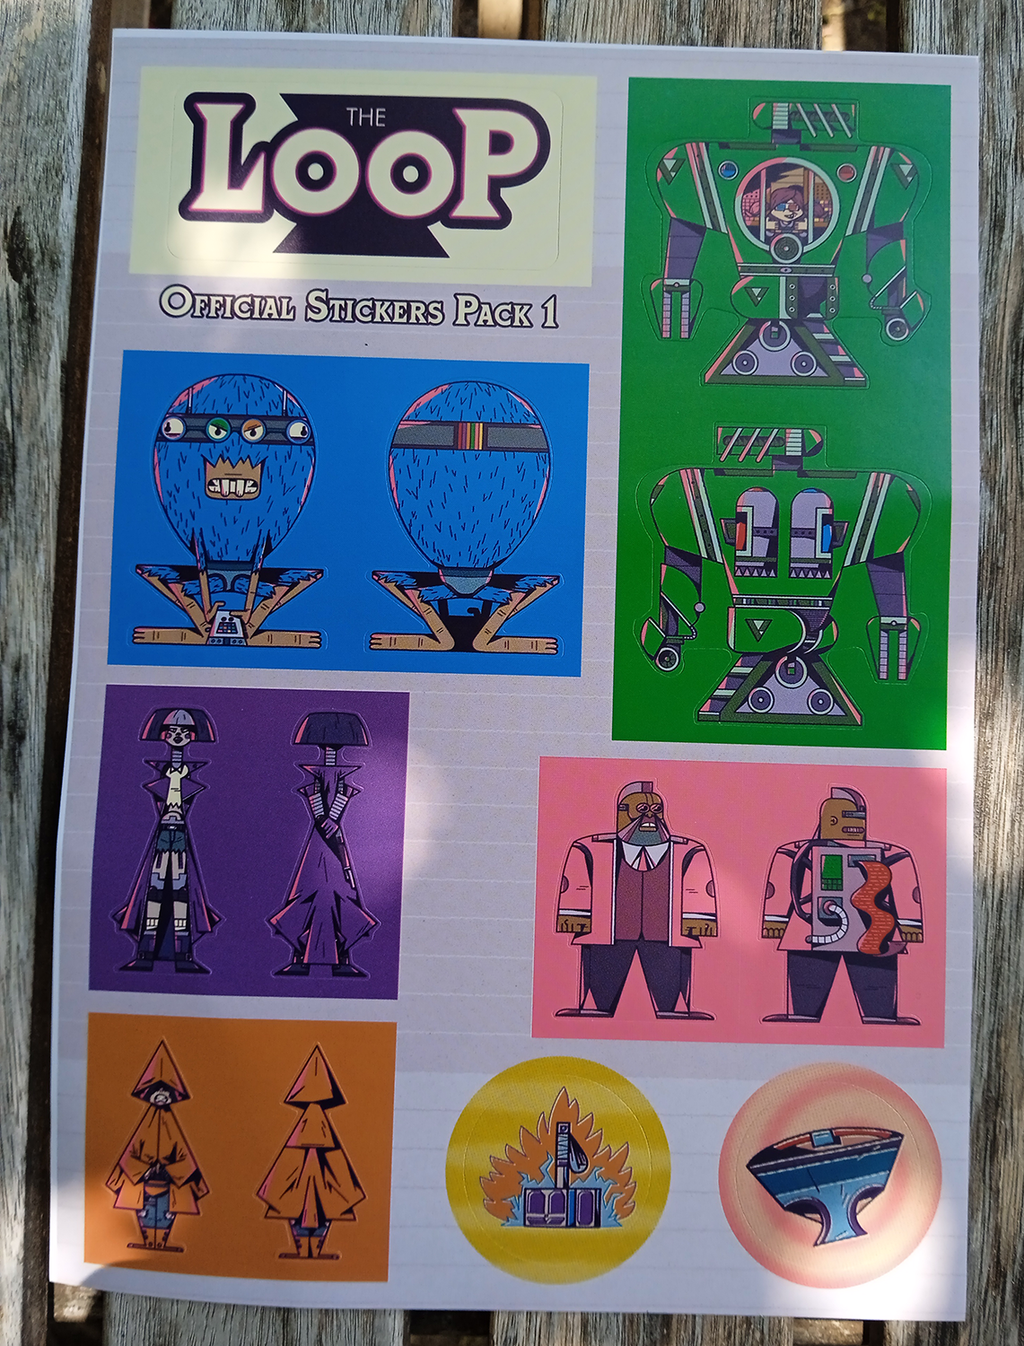 The Loop - Stickers Officiels Pack1